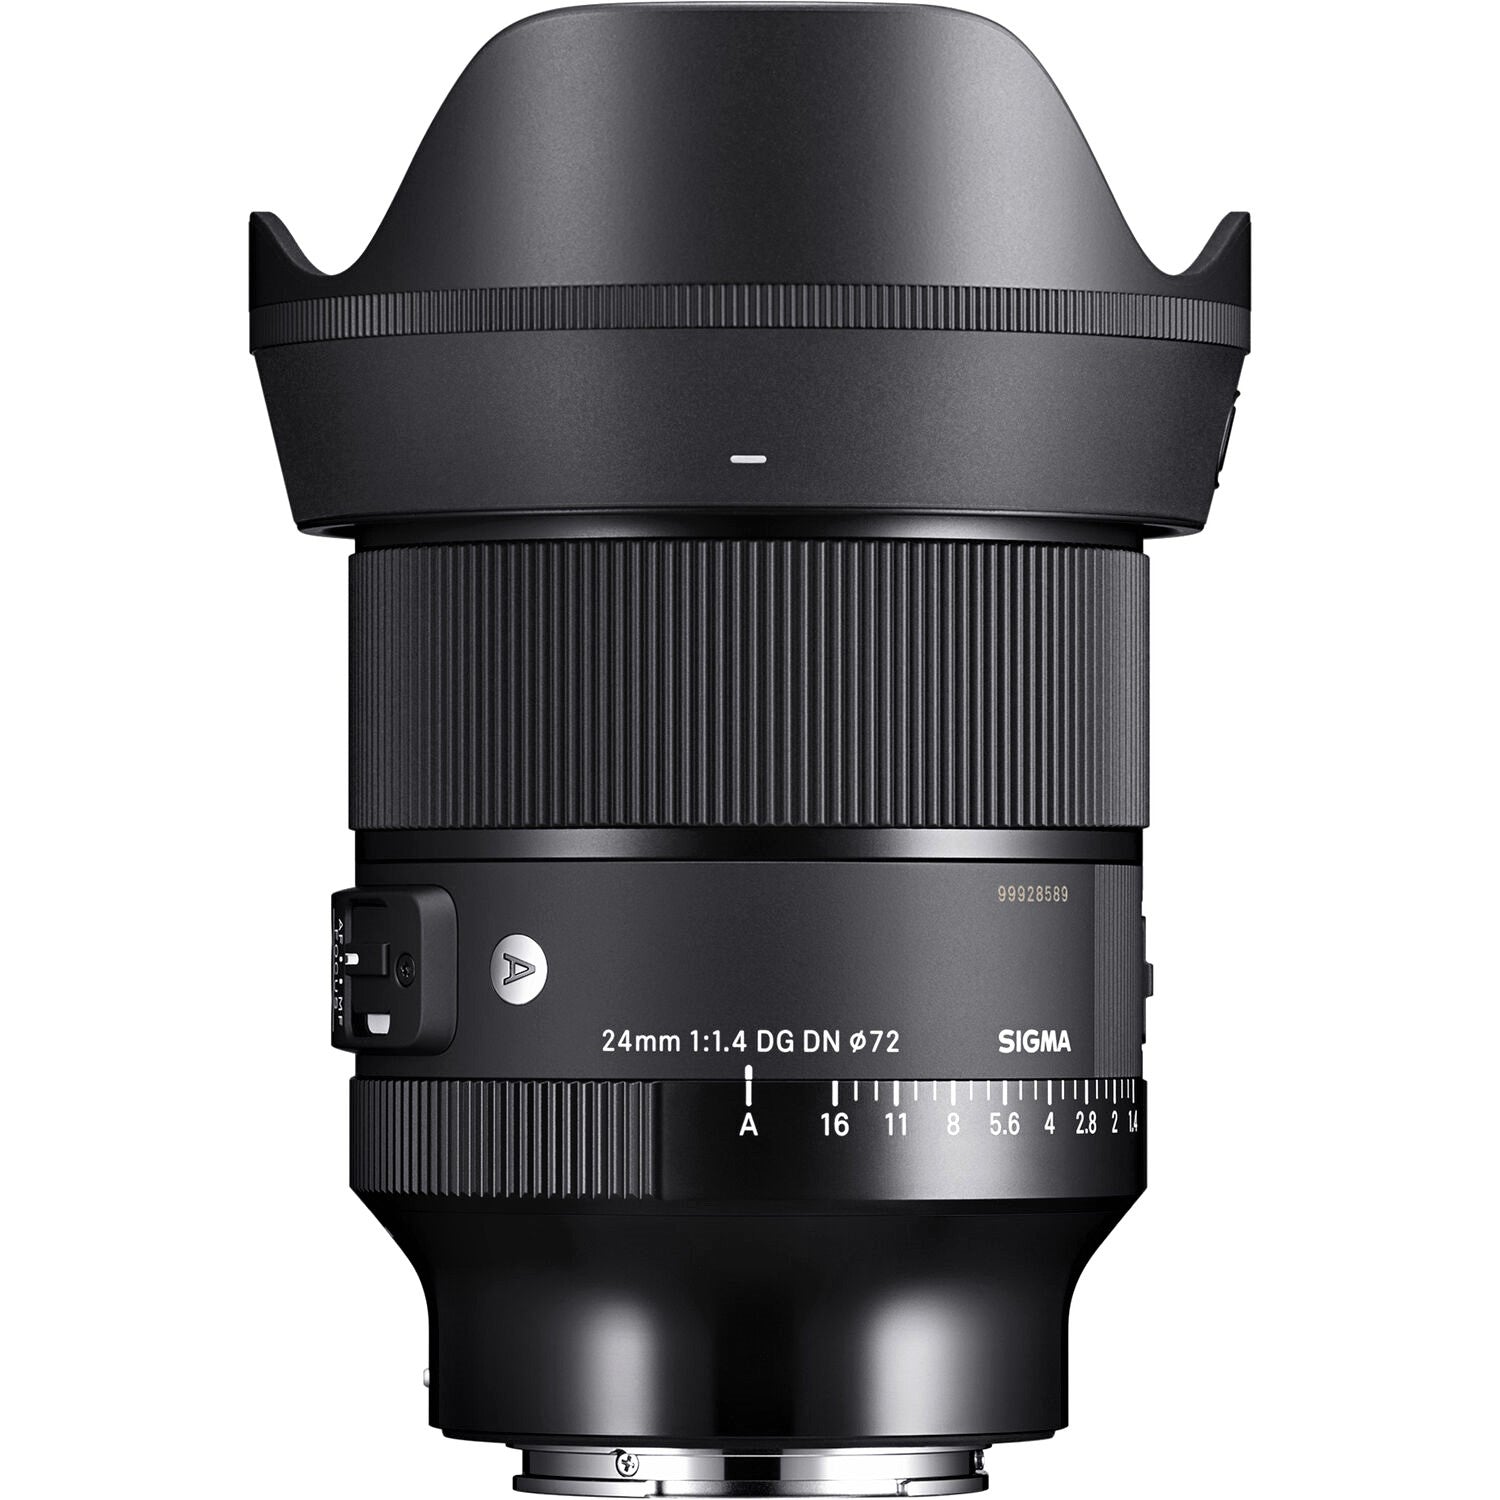 Sigma 24mm F1.4 DG DN Art Lens (Sony E Mount) with Attached Lens Hood on the Top